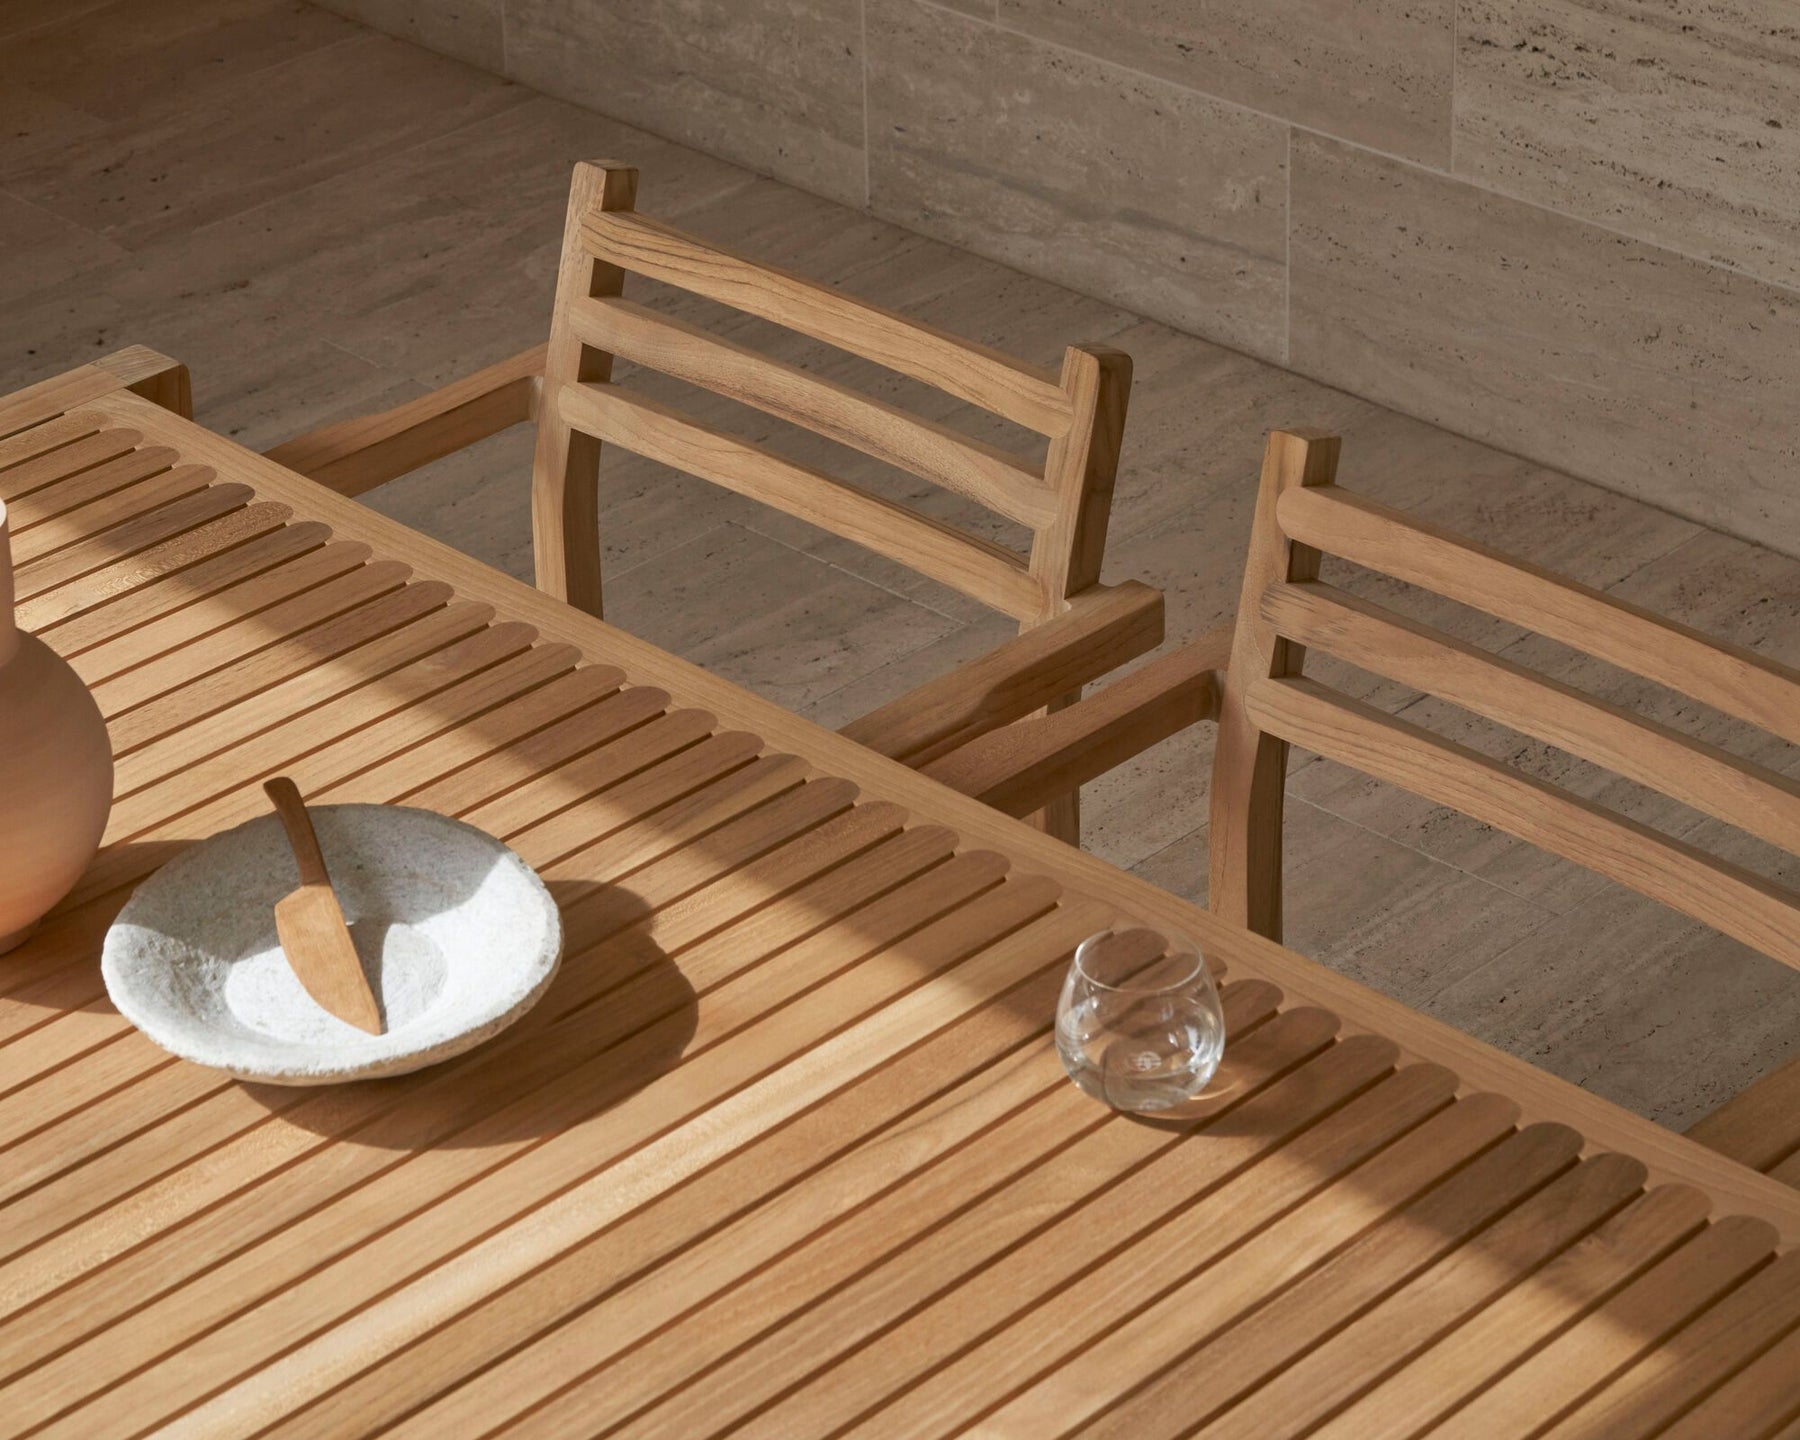 Outdoor Wood Dining Table & Chairs | DSHOP